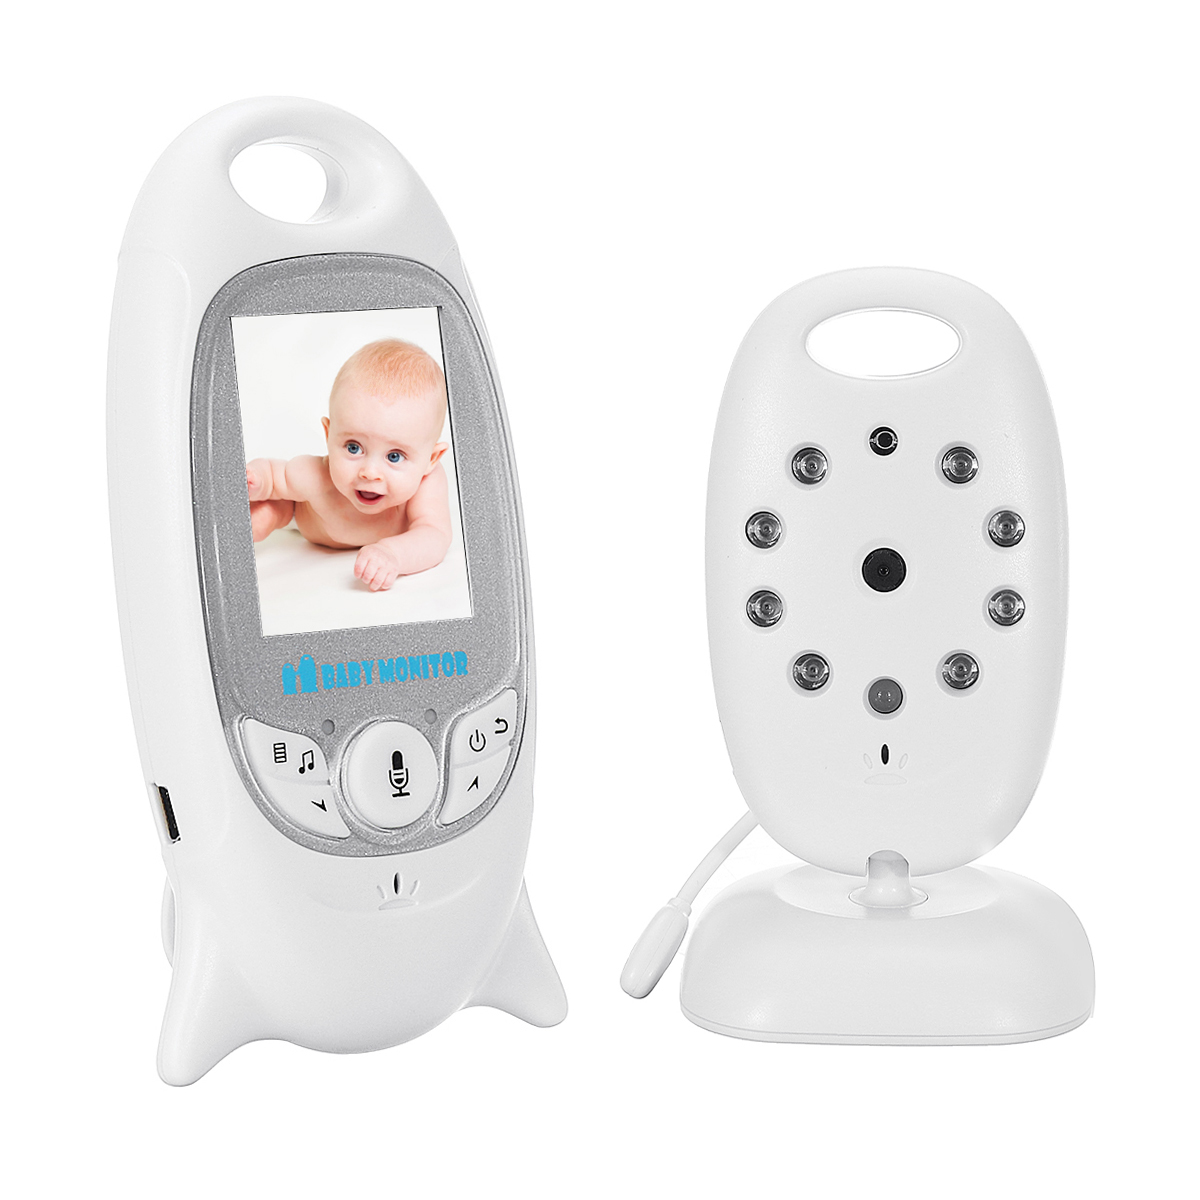 

Wireless Video Baby Monitors Color Security Camera 2 Way Night Vision Infrared LED Temperature Monitoring and 8 Lullaby